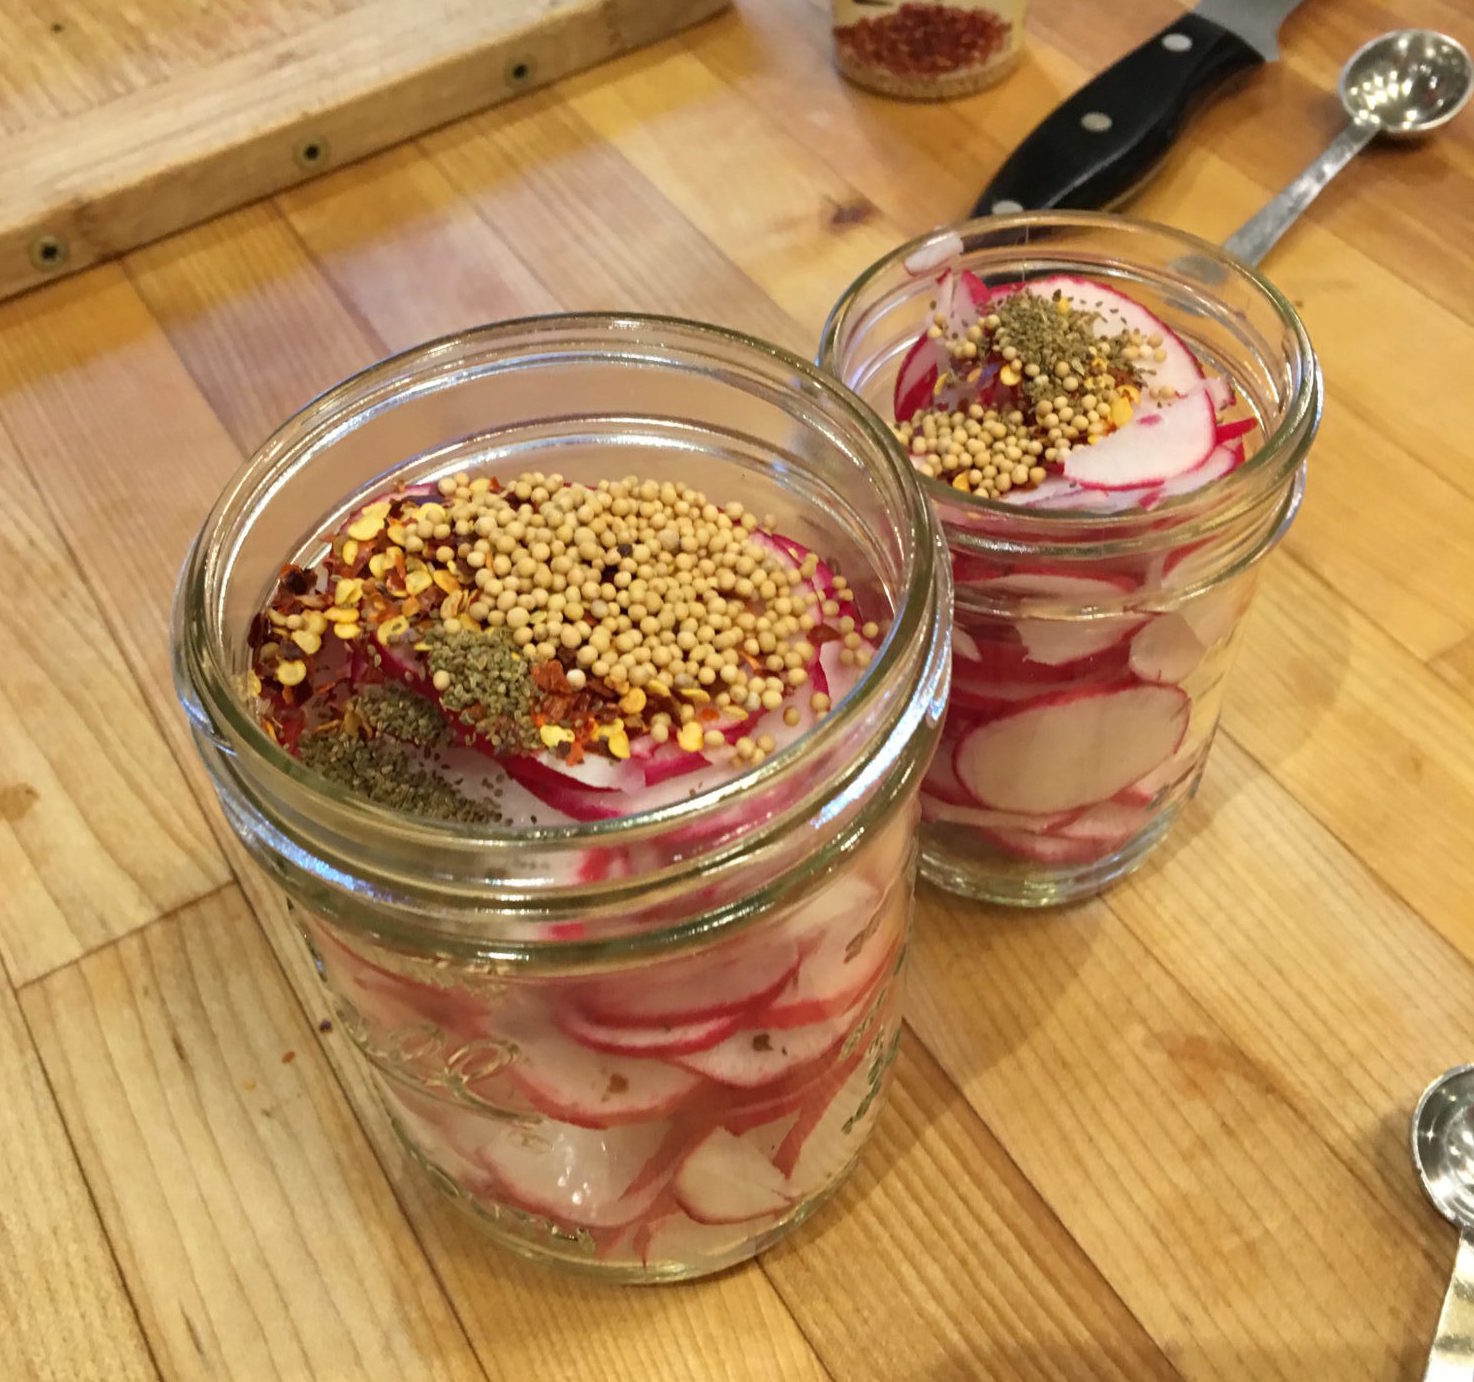 Pickling Spices on Radishes